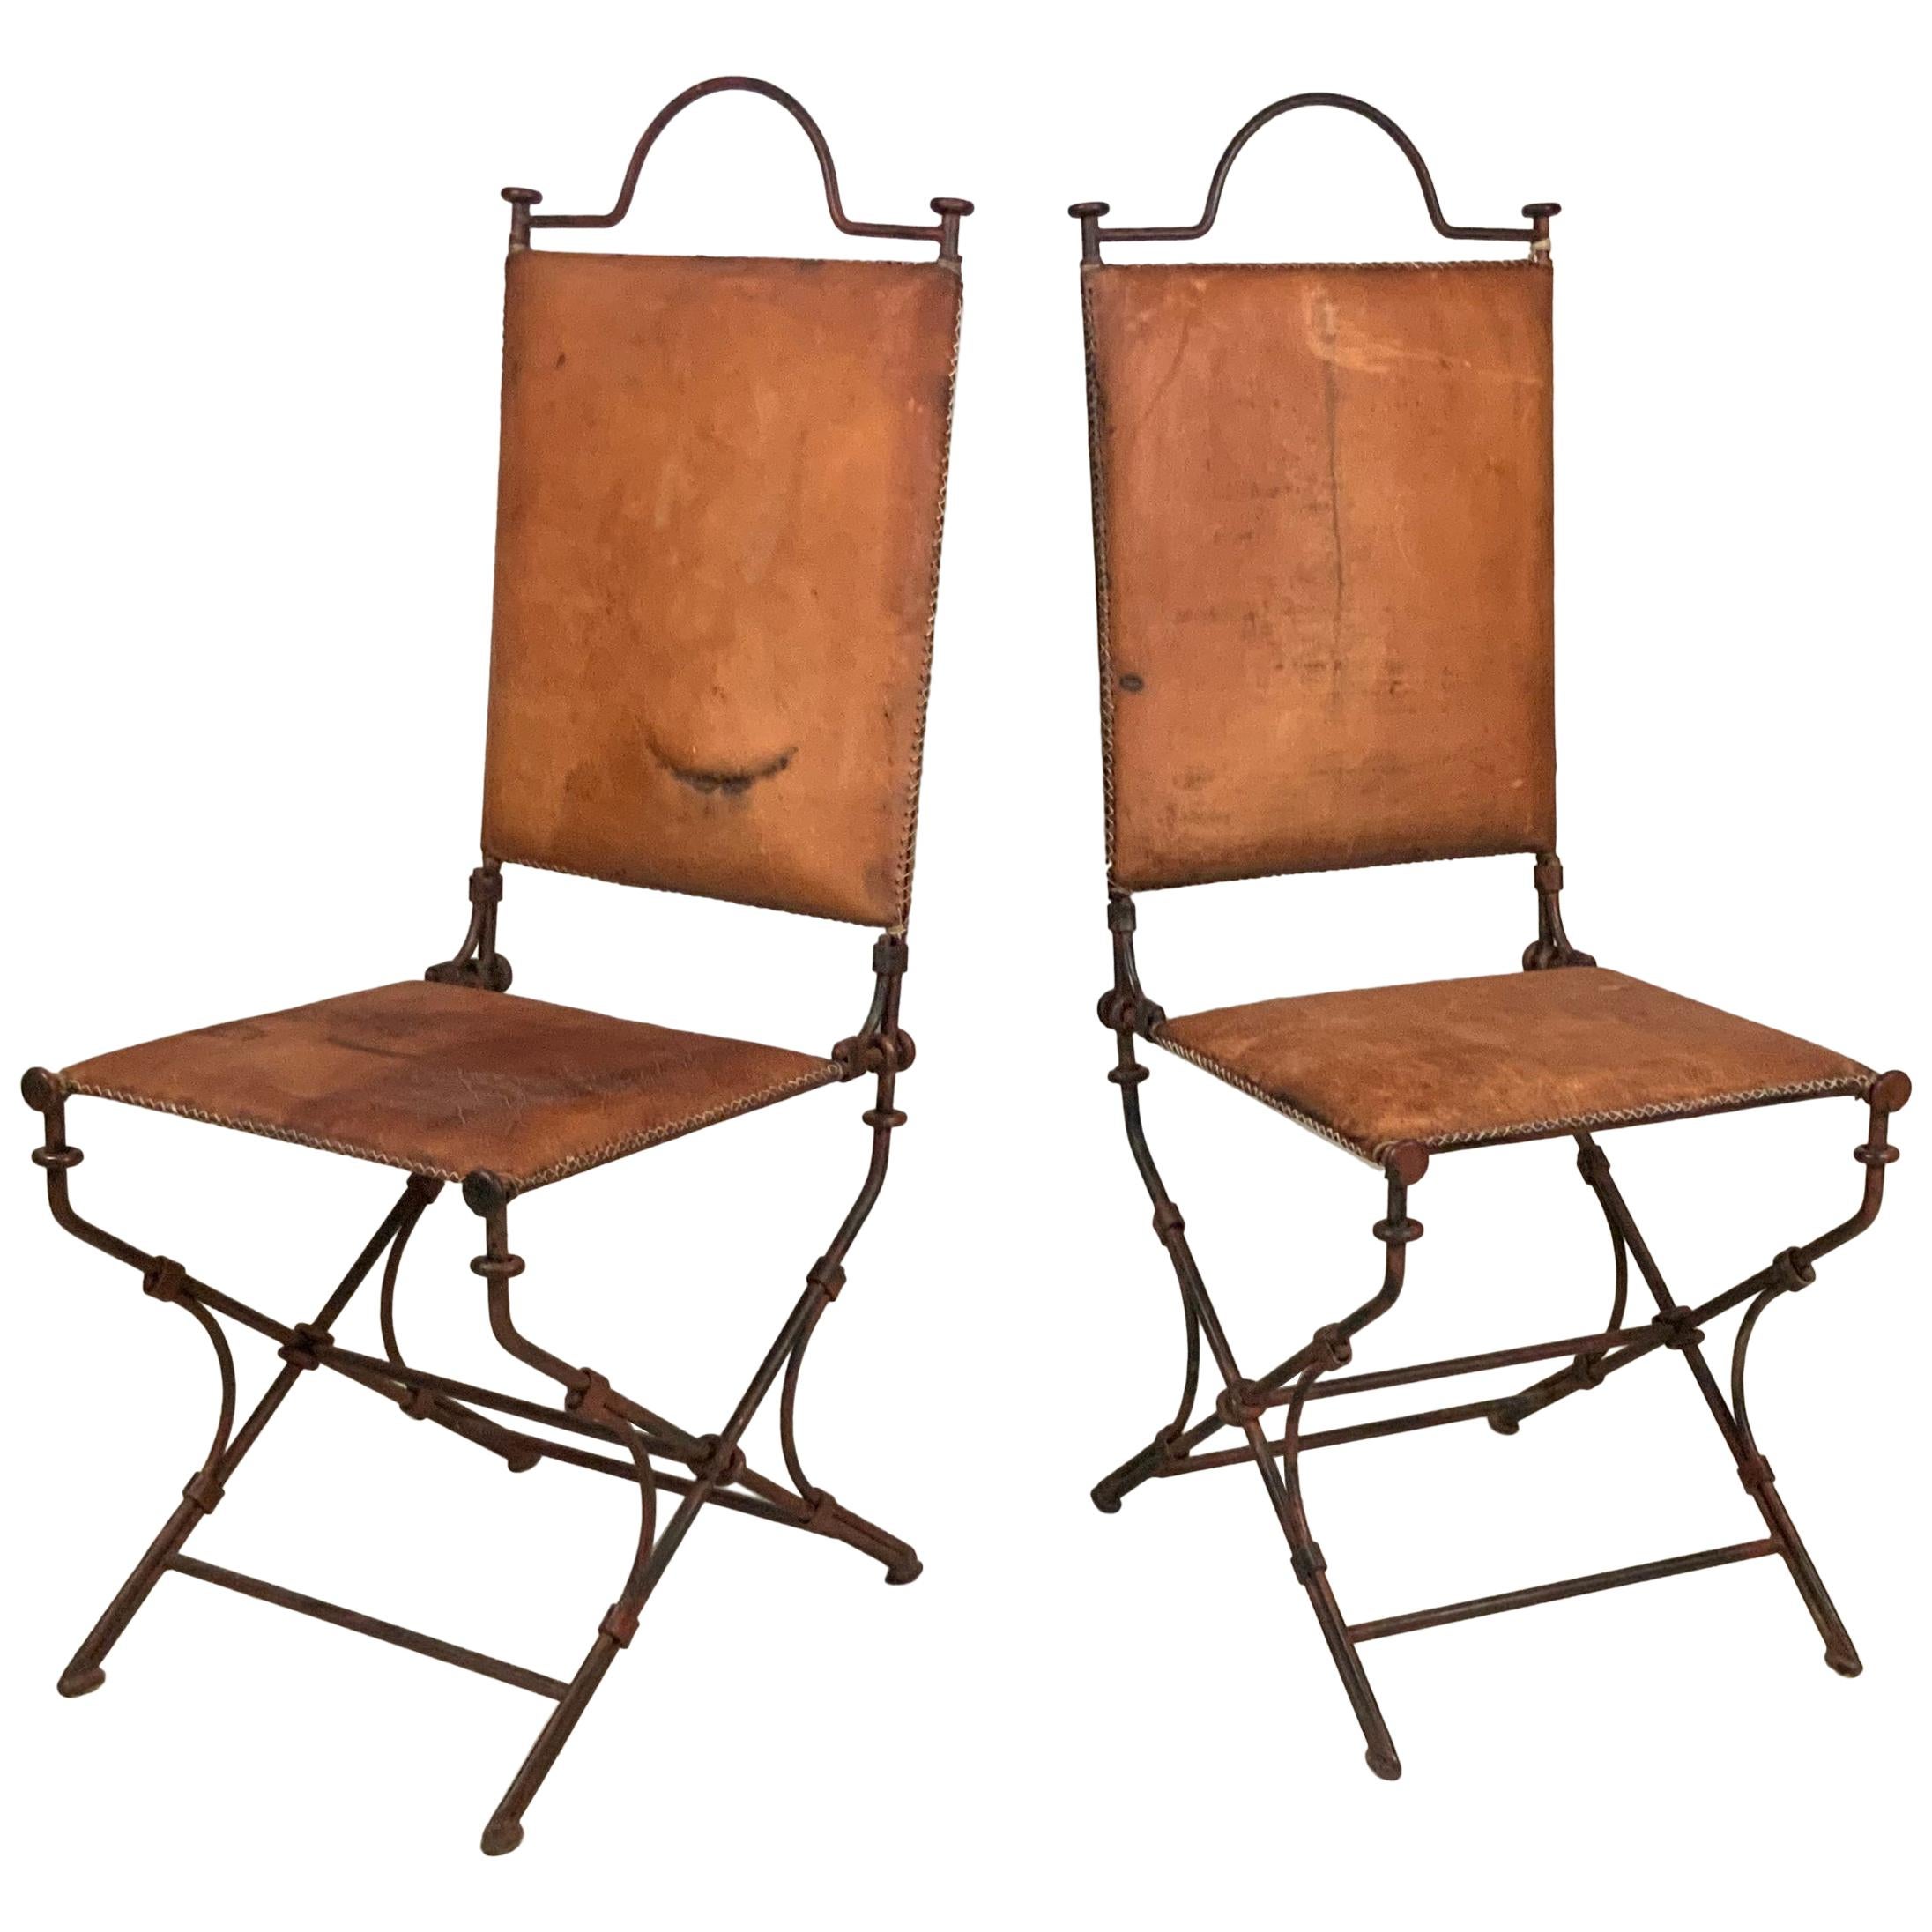 Pair of Iron and Leather Chairs by Ilana Goor